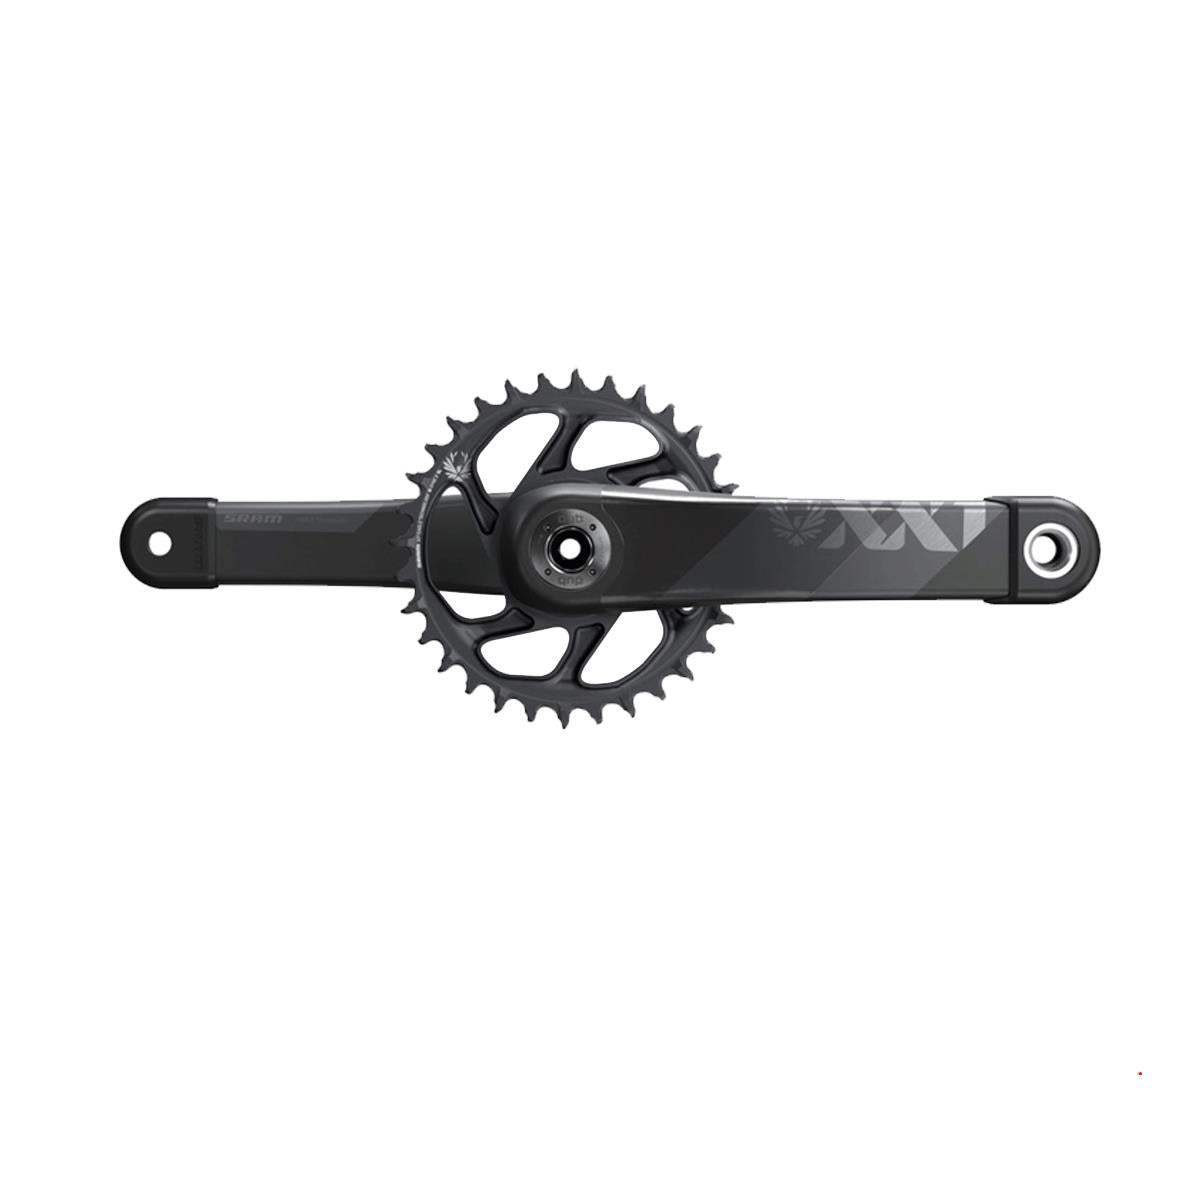 Sram Crankset Xx1 Eagle Dub 12S With Direct Mount 34T X-Sync 2 Chainring (Dub Cups/Bearings Not Included) C2